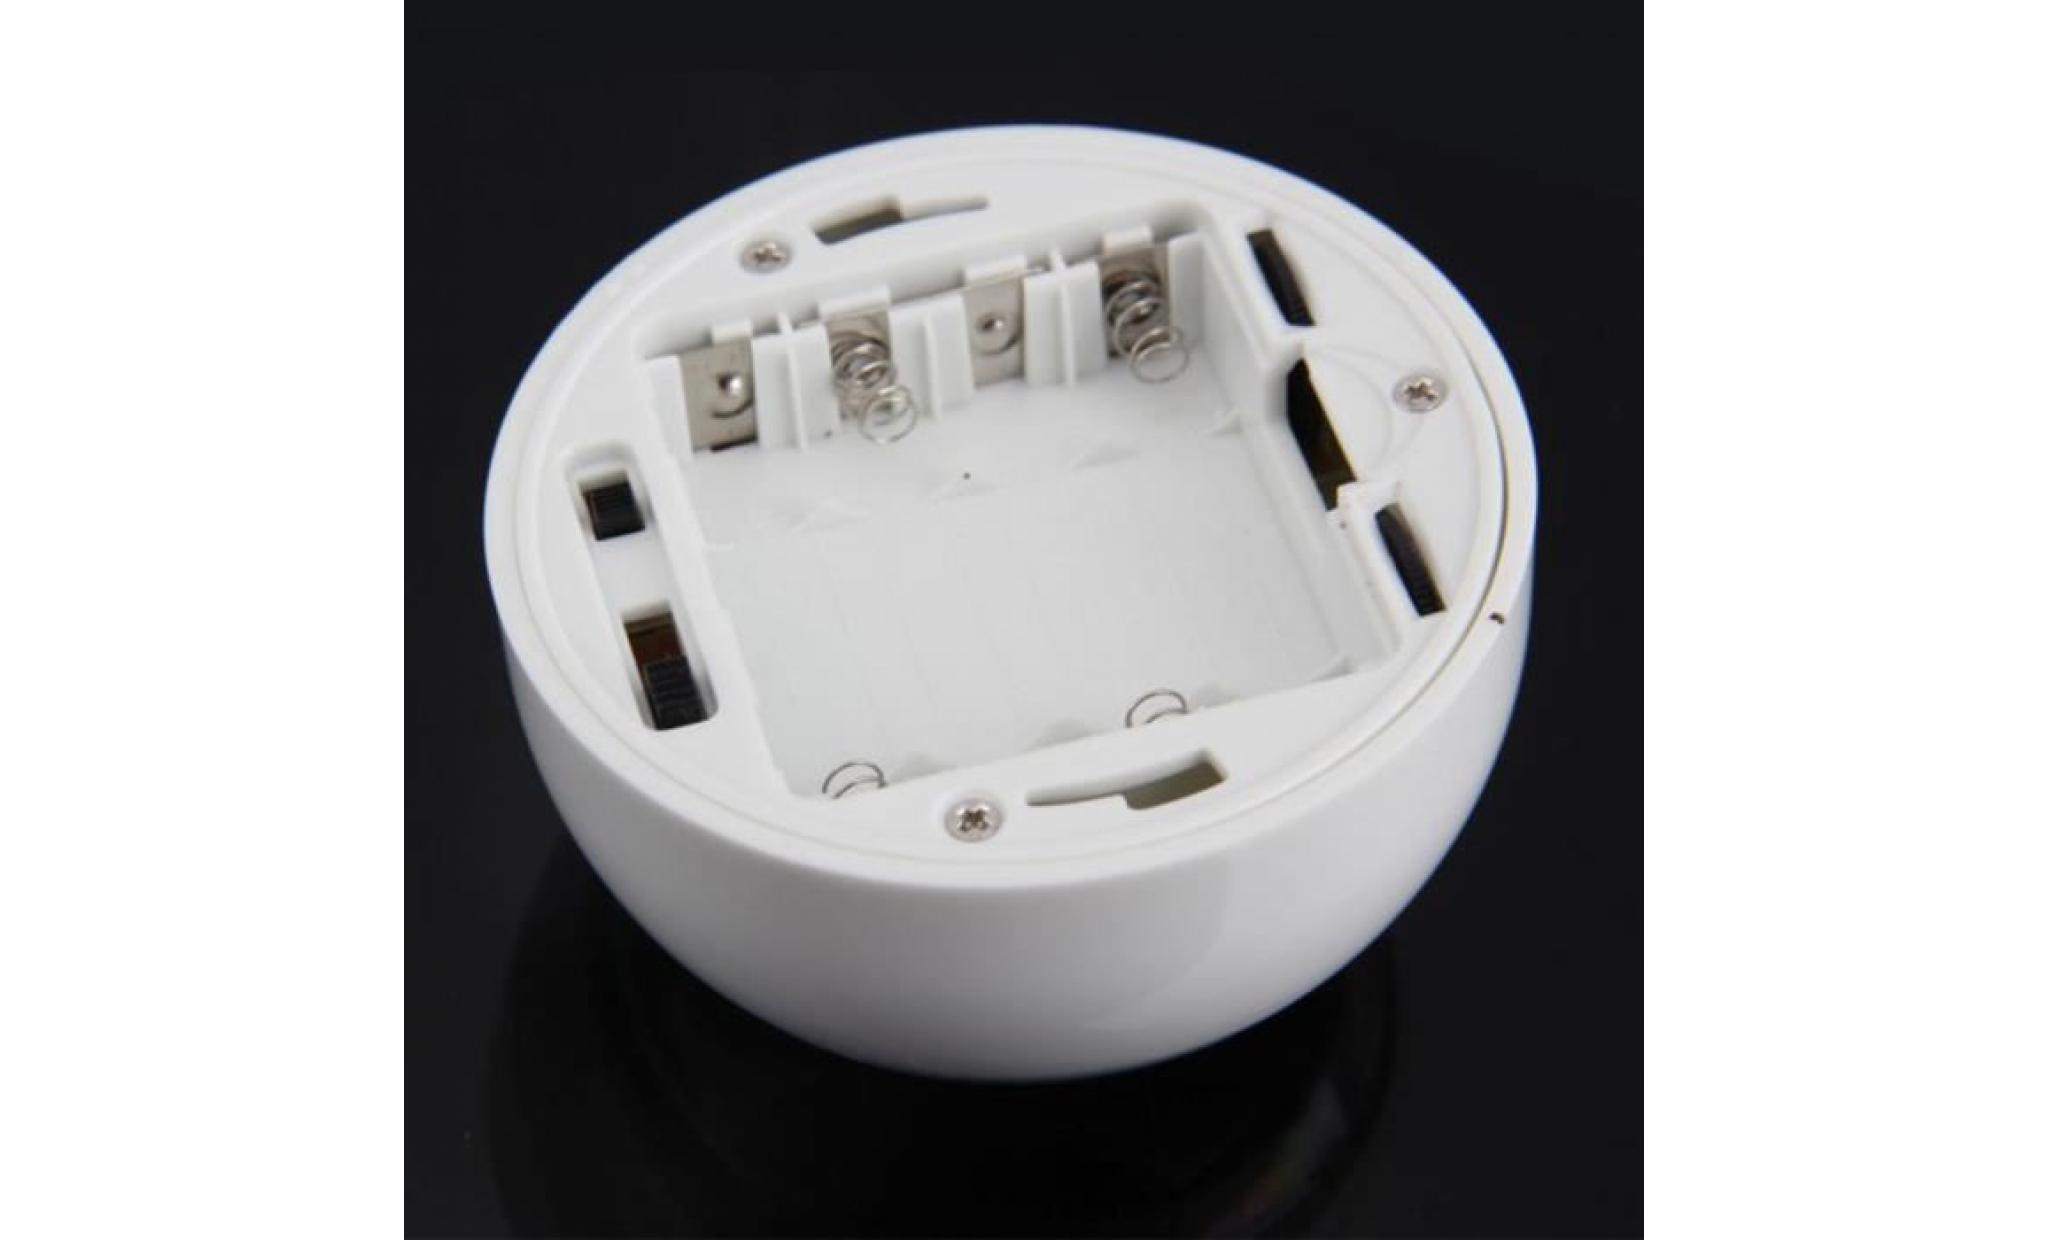 pir auto sensor motion detector lamp 6 leds light wireless infrared home outdoor pageare1050 pageare1050